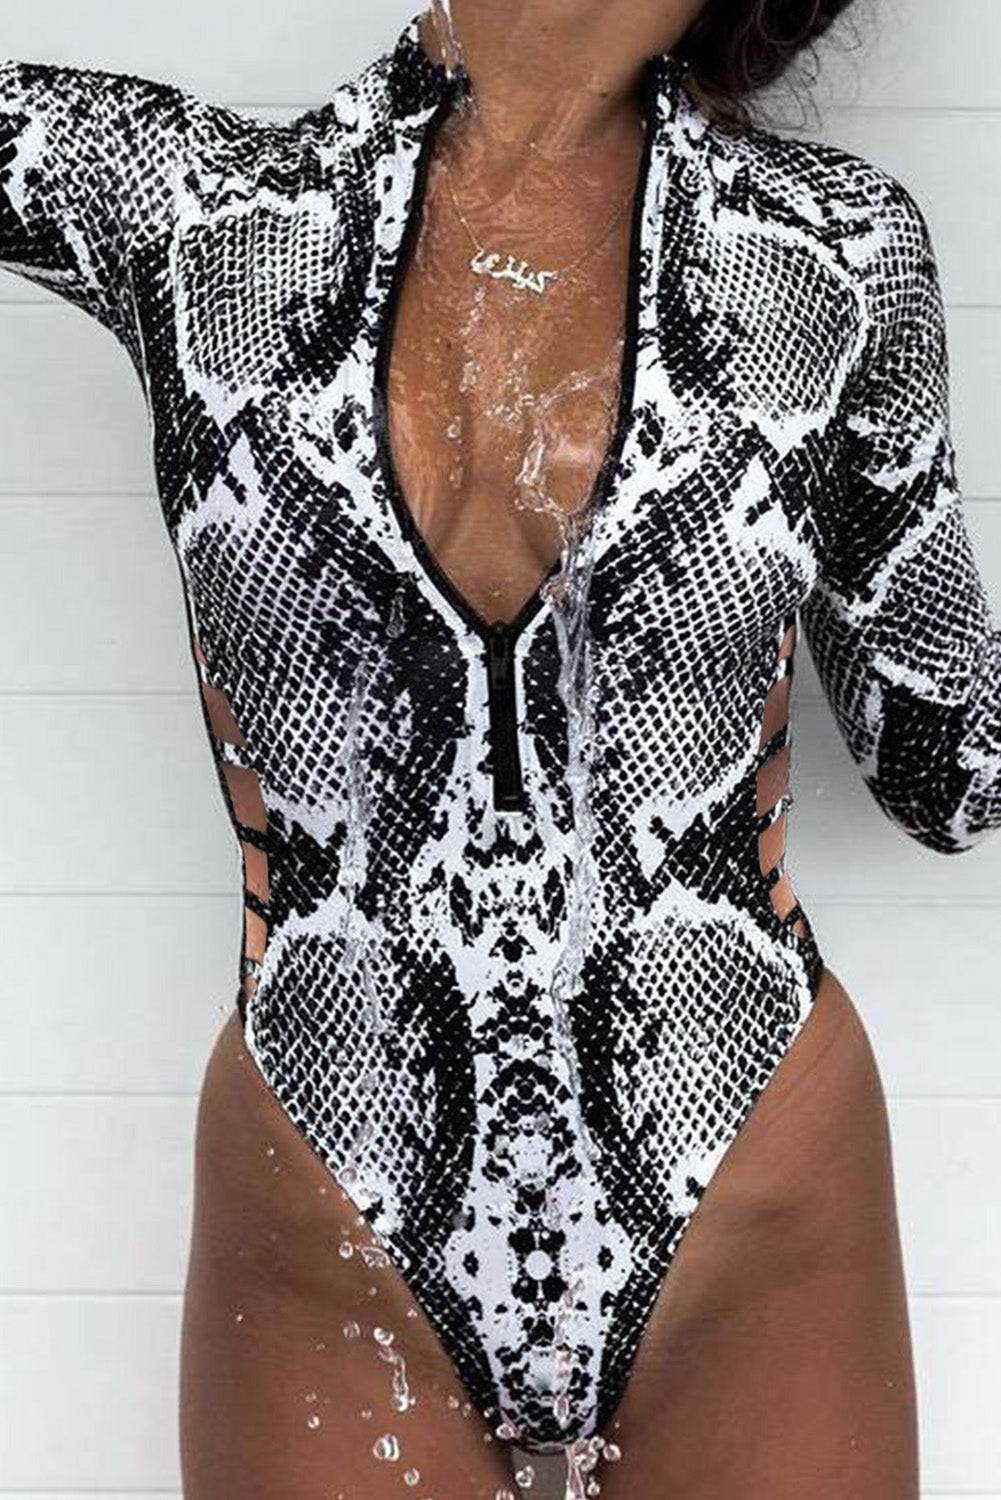 Animal Print Zipper Cut-Out Wetsuit in Snake, Leopard, and Blue